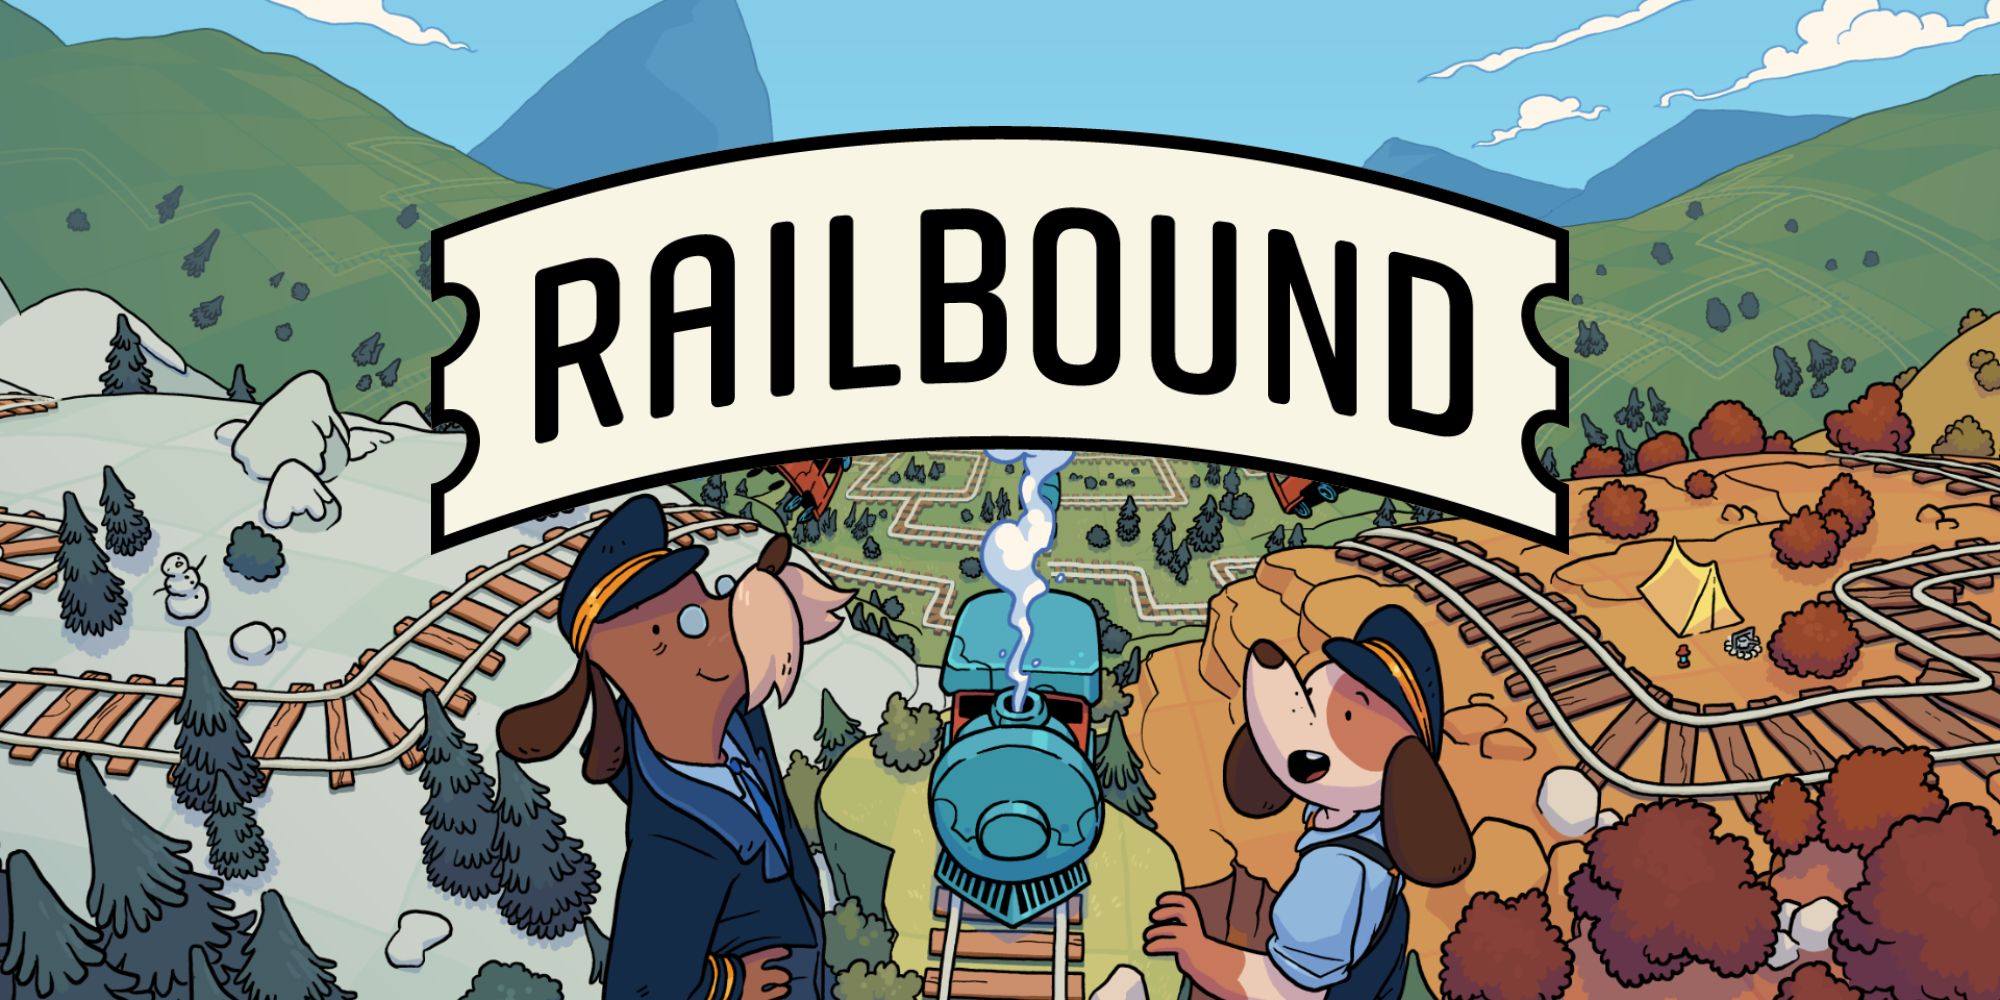 Railbound Review art of the two dogs, train, biomes, and logo